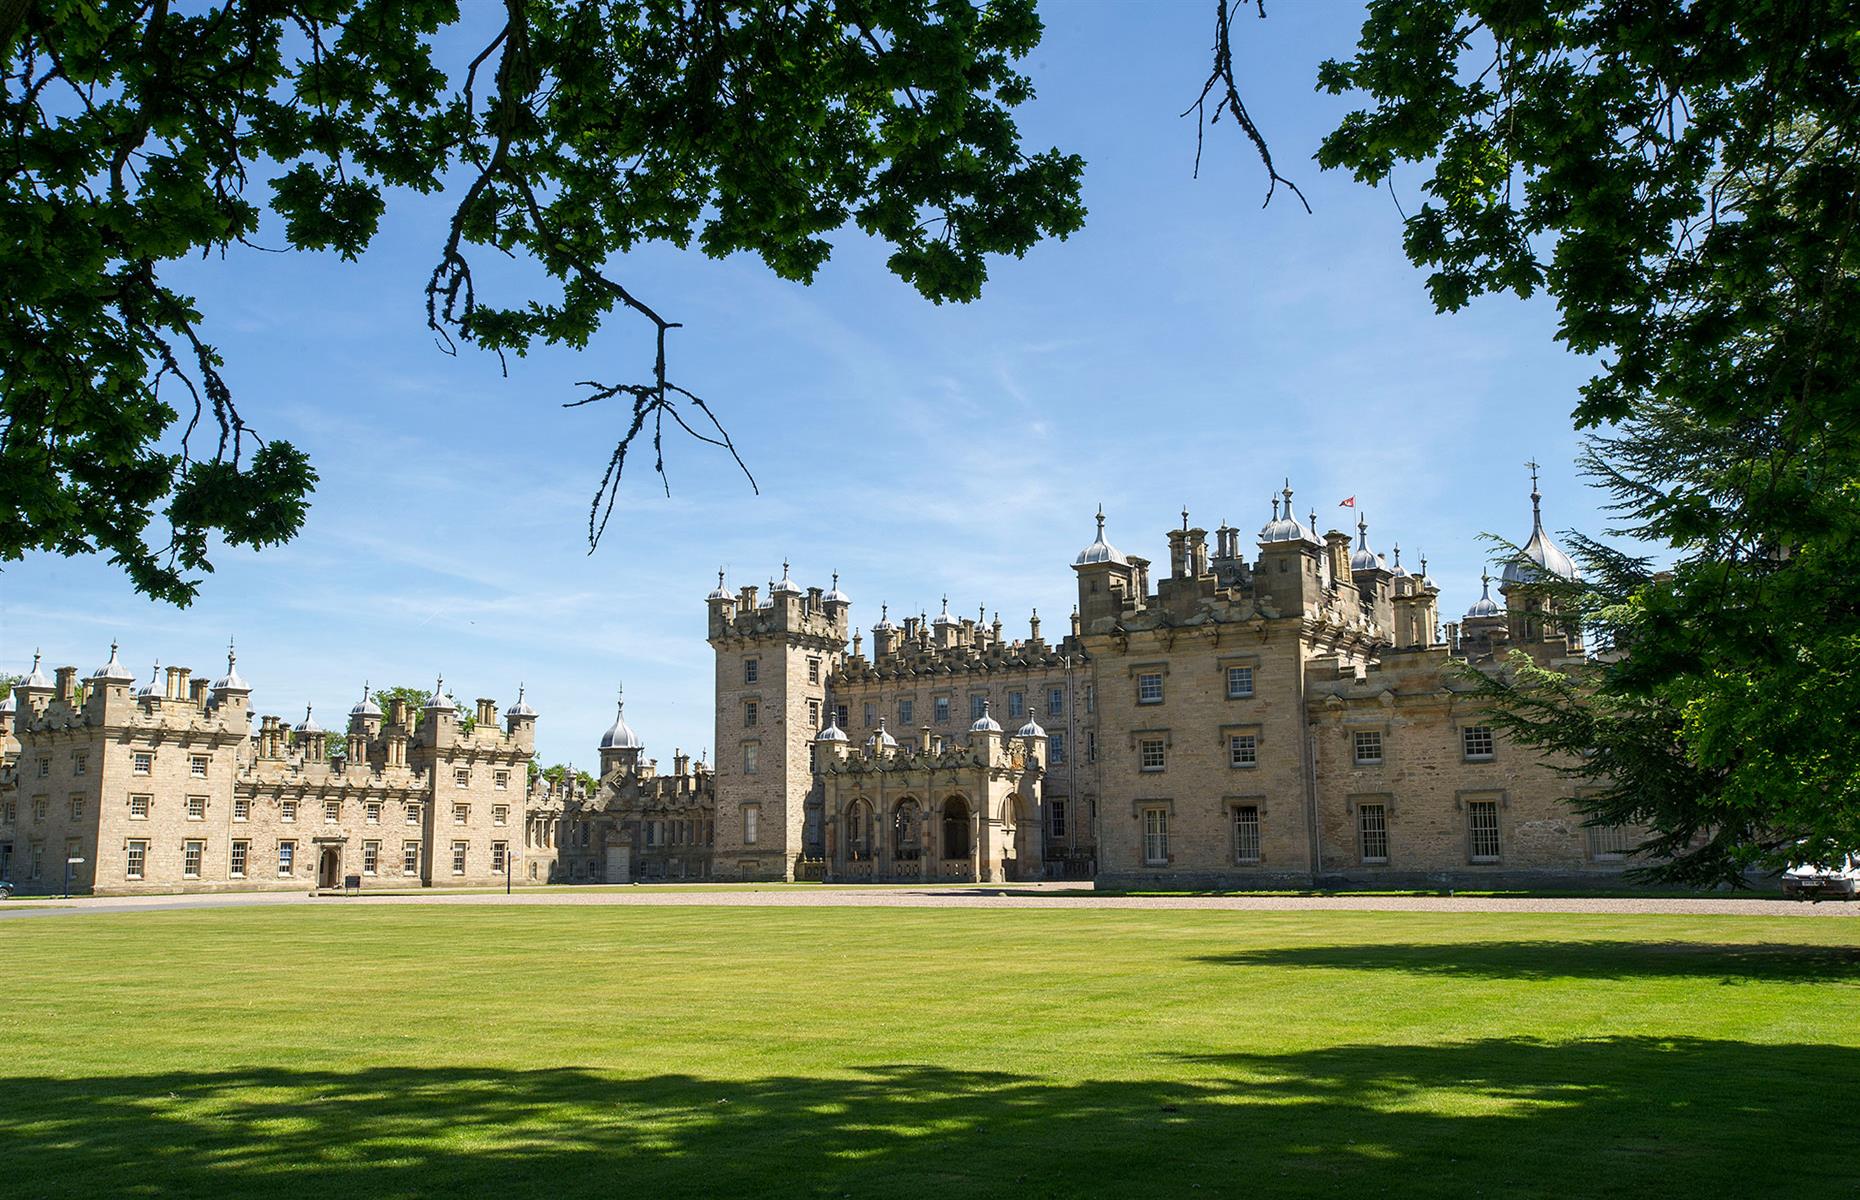 <p>If Aberdeenshire is home to Scotland's highest concentration of castles, then the Borders must be home to its 'big houses' or stately homes. The family seat of the Duke of Roxburghe and his family, <a href="https://www.floorscastle.com/">Floors Castle</a> was built in the 1720s by William Adam and includes symmetrical wings, with William Playfair adding to them in the 19th century with battlements and turrets.</p>